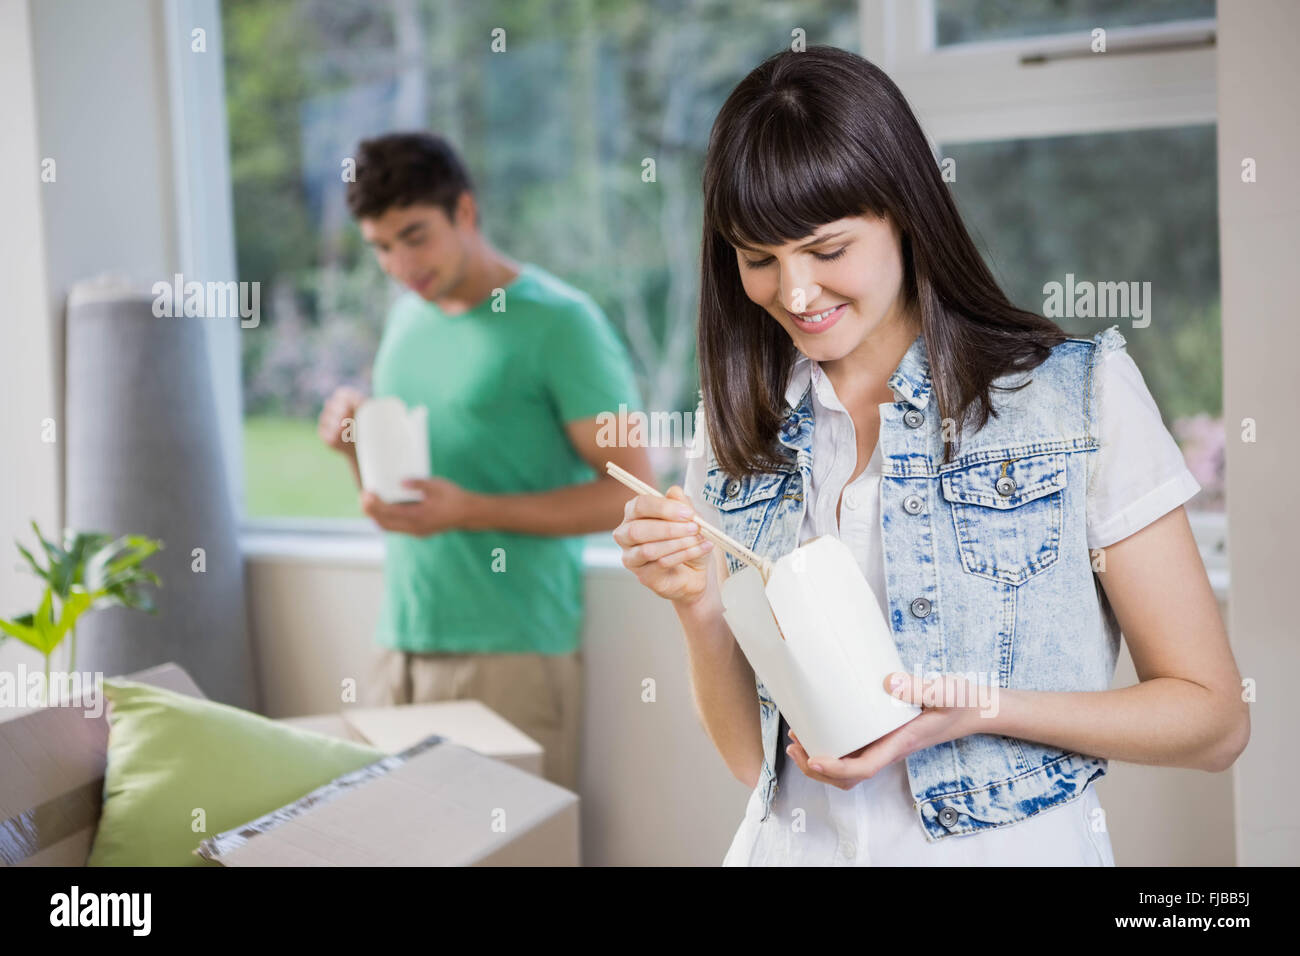 Portrait of young woman eating noodles at home Stock Photo